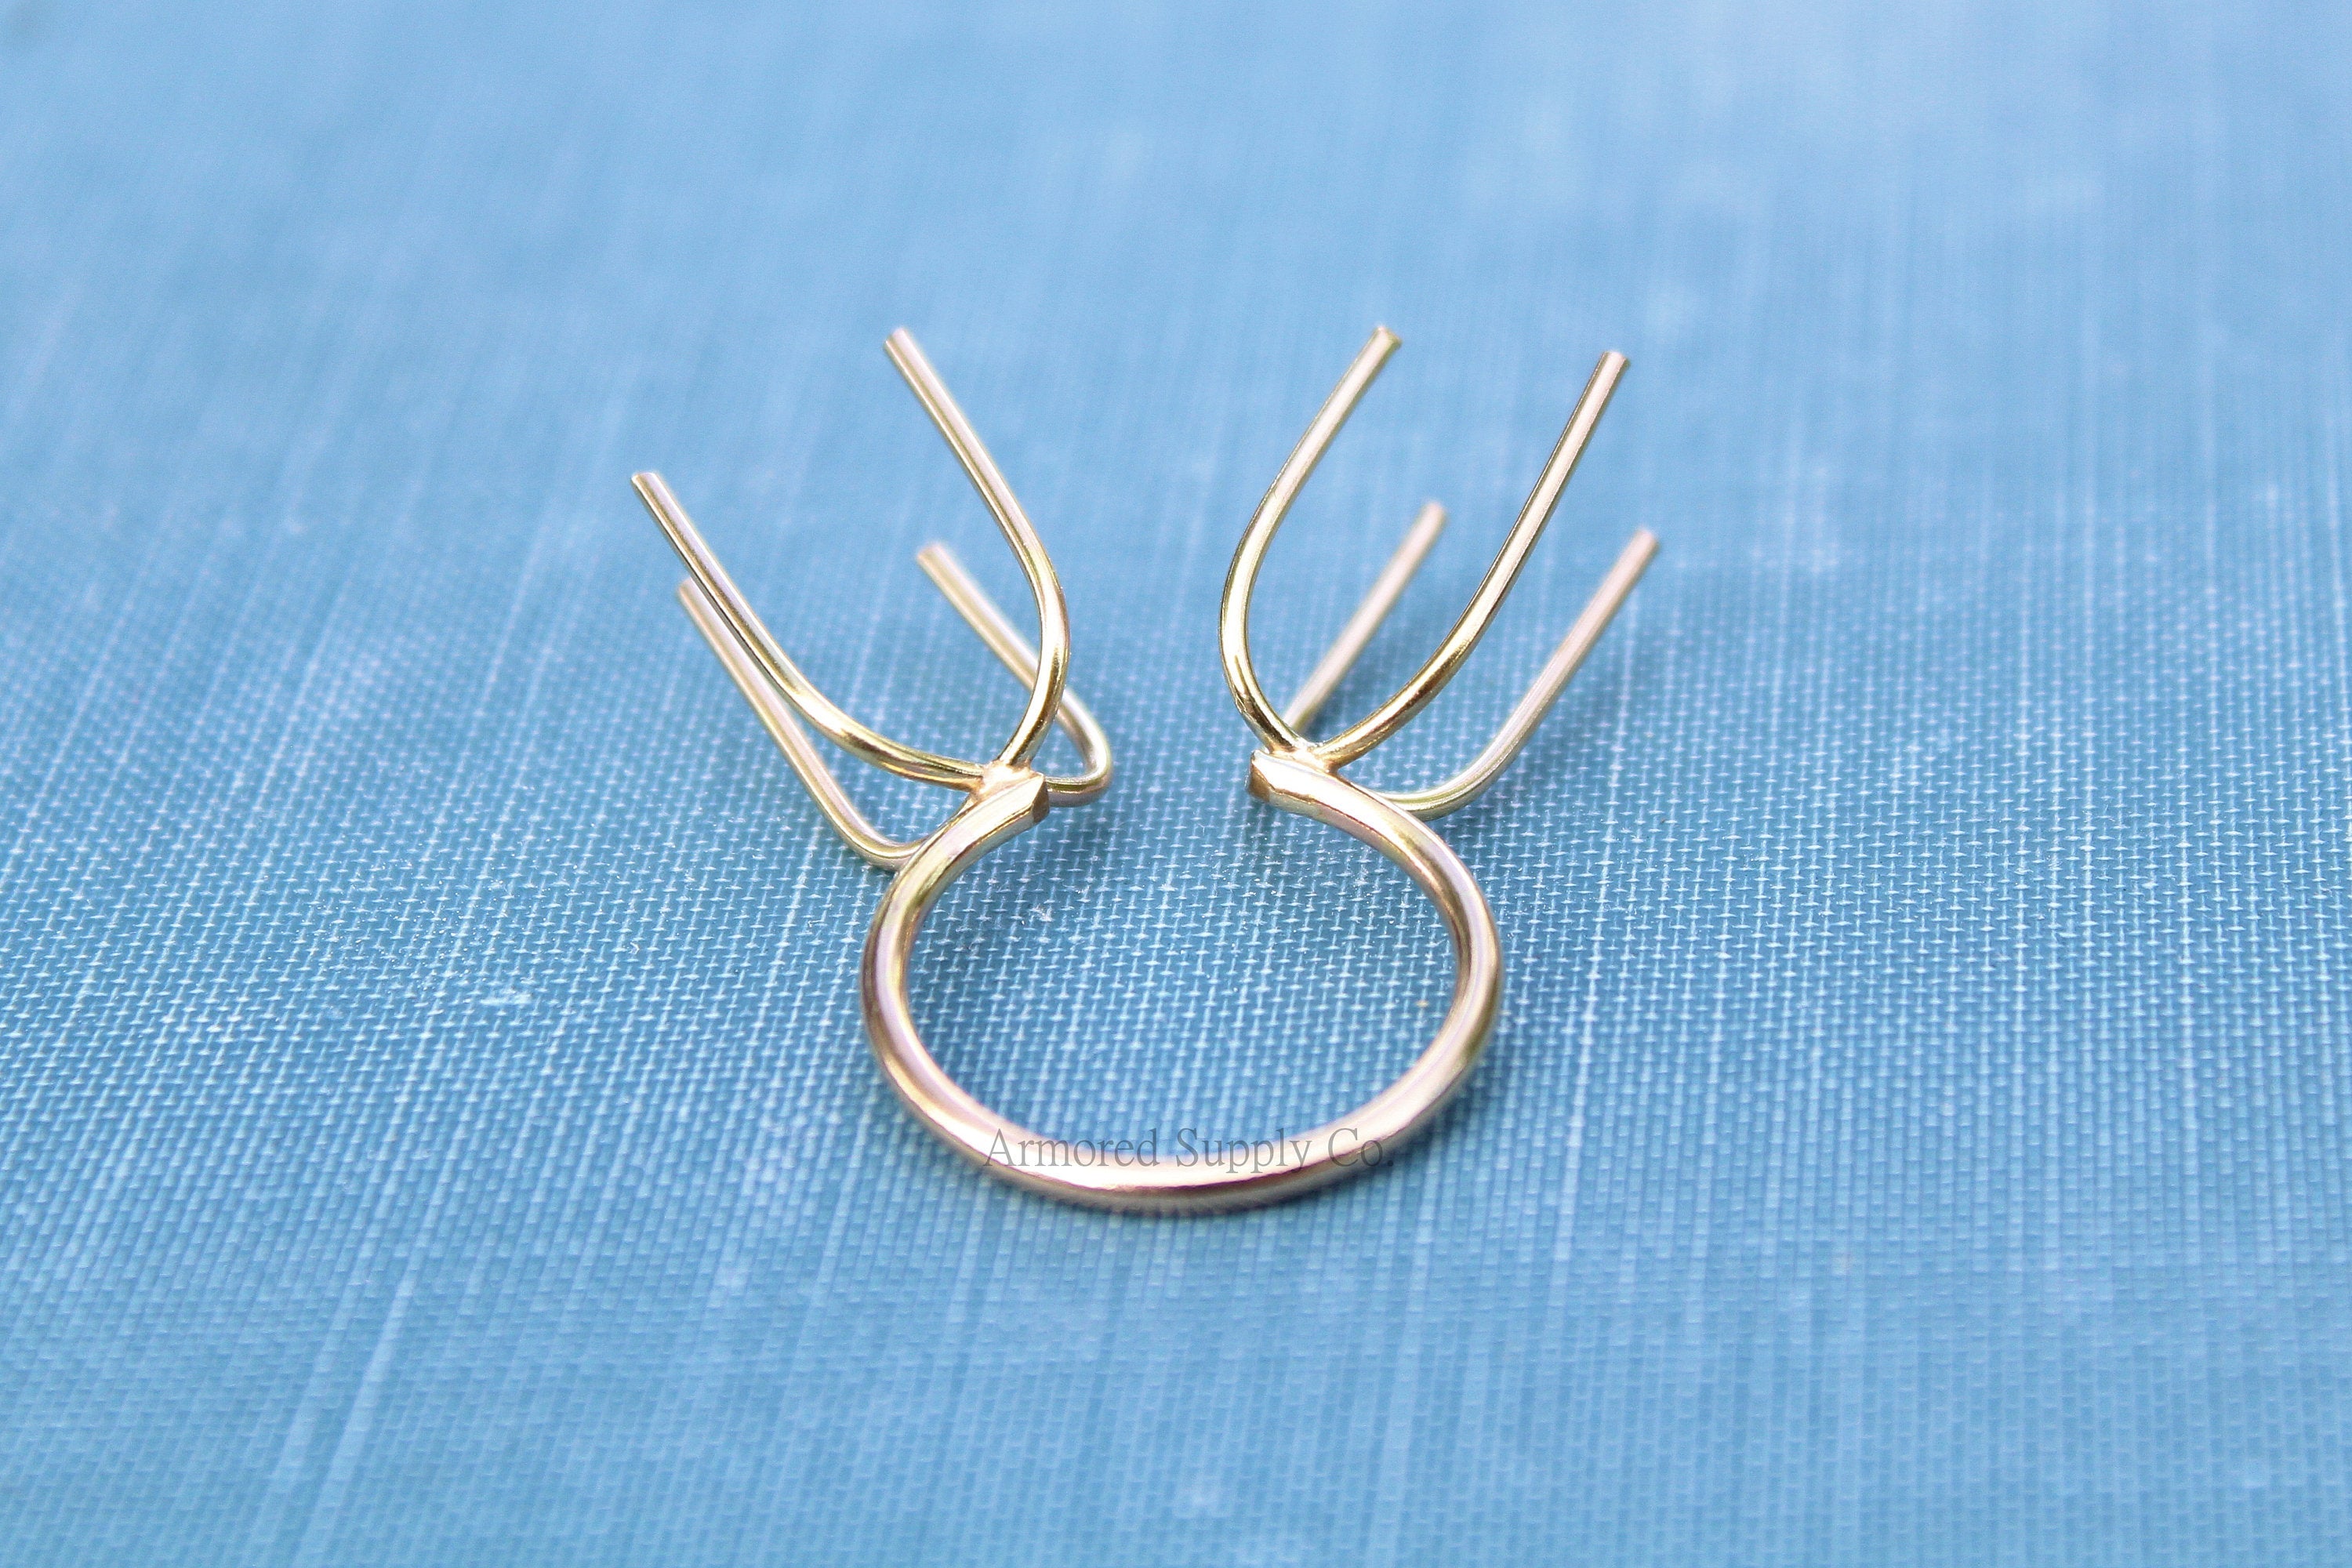 Gold Claw Prong Ring Blank, Adjustable Open Ring Band, Double Claw Prong Ring Blank, Wholesale Silver Ring, DIY Jewelry, Jewelry Supplies